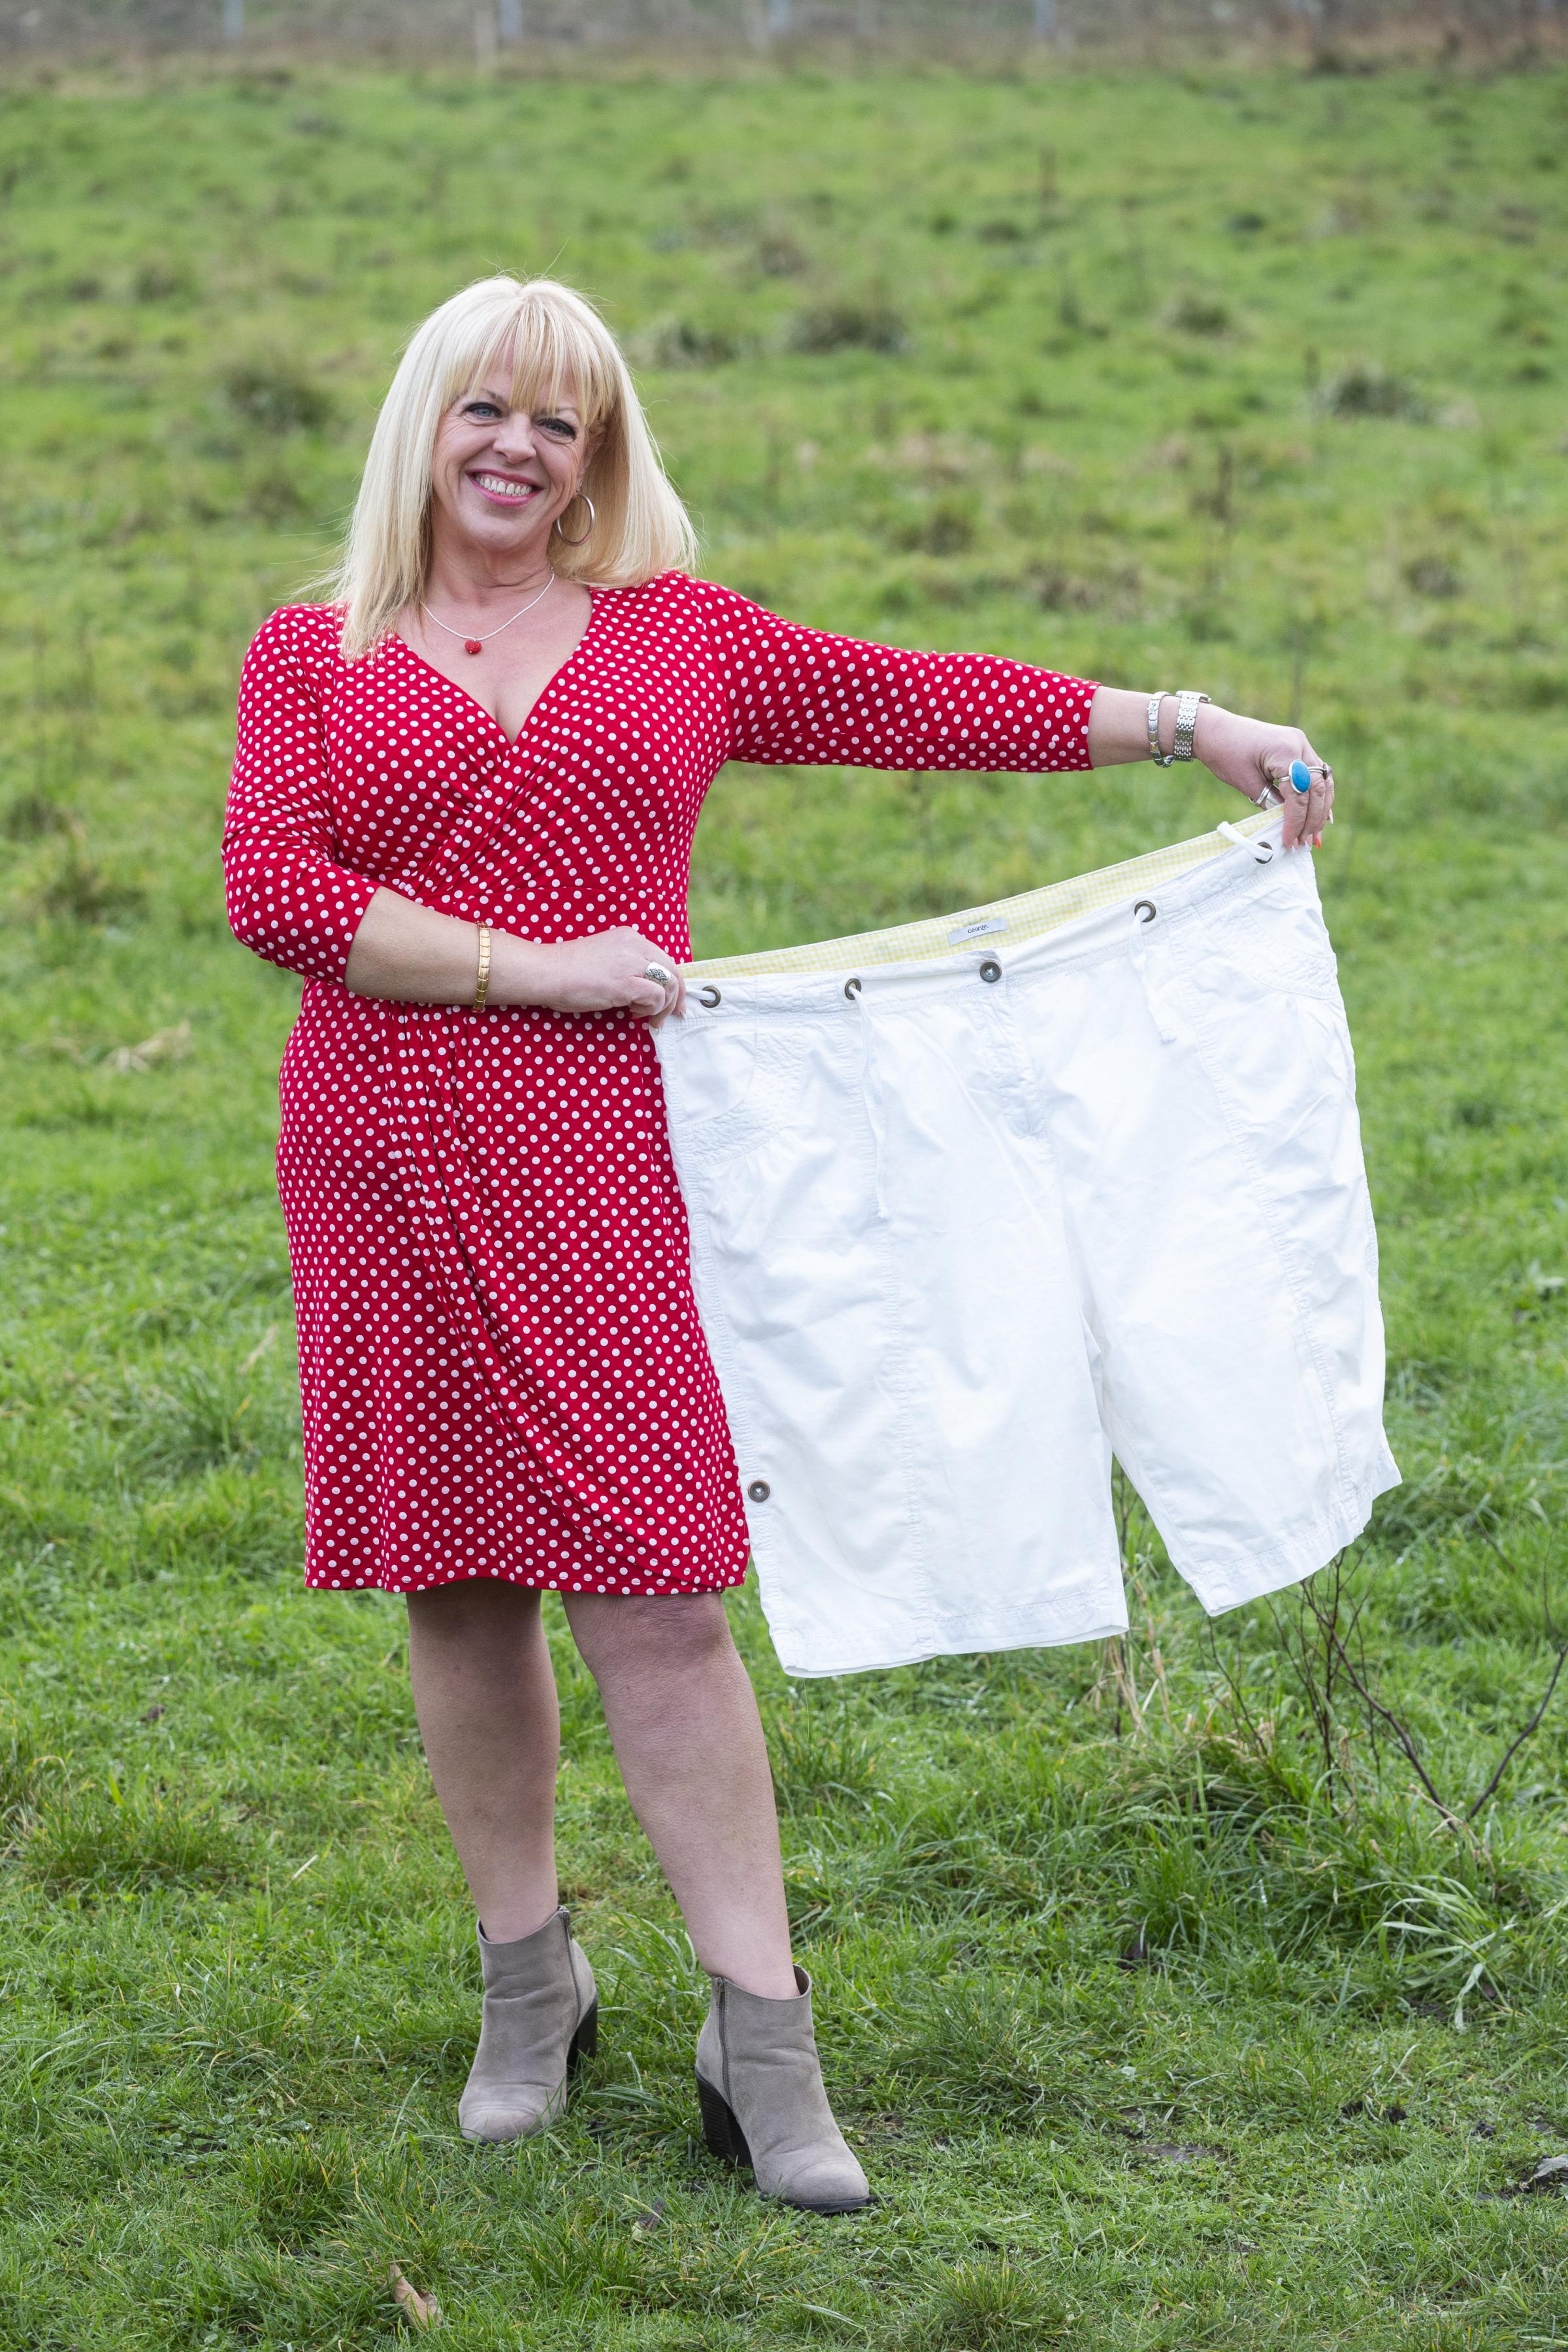 Karen Fay holds her old size 24 shorts she use to wear